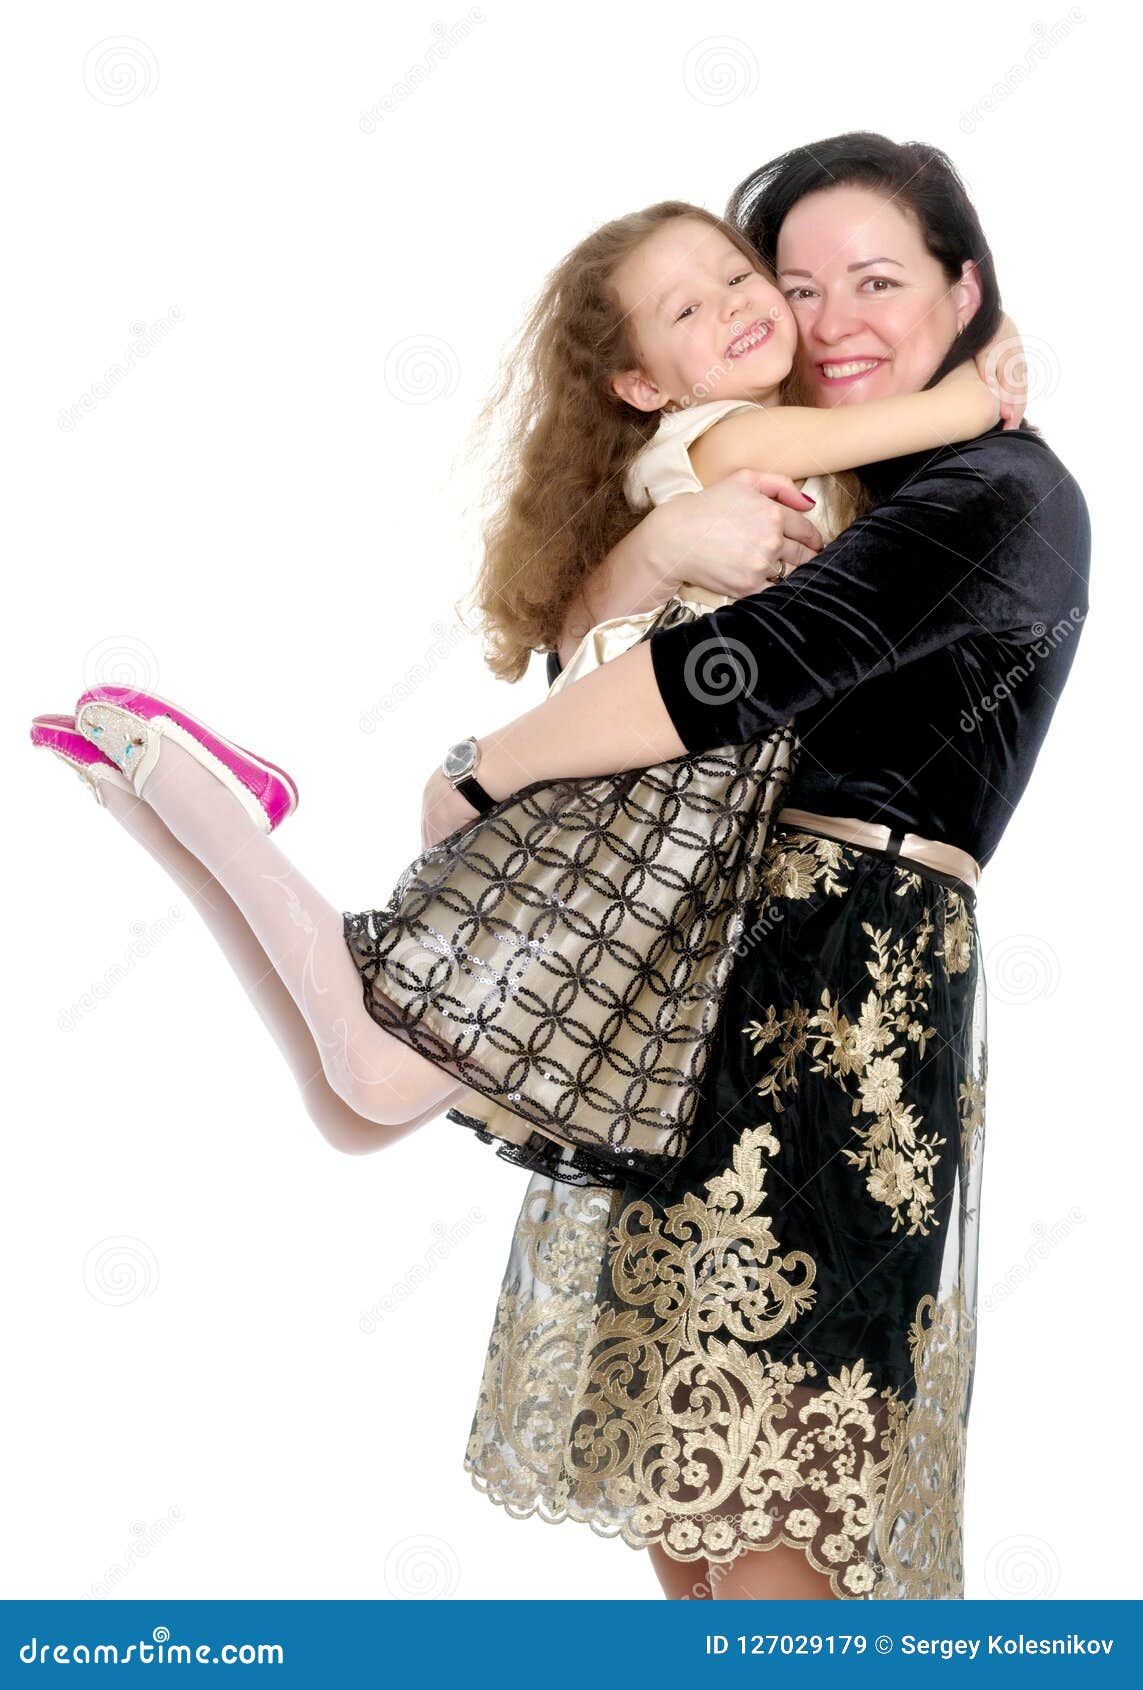 Mother And Little Daughter Gently Embrace Stock Image Image Of Positive Care 127029179 